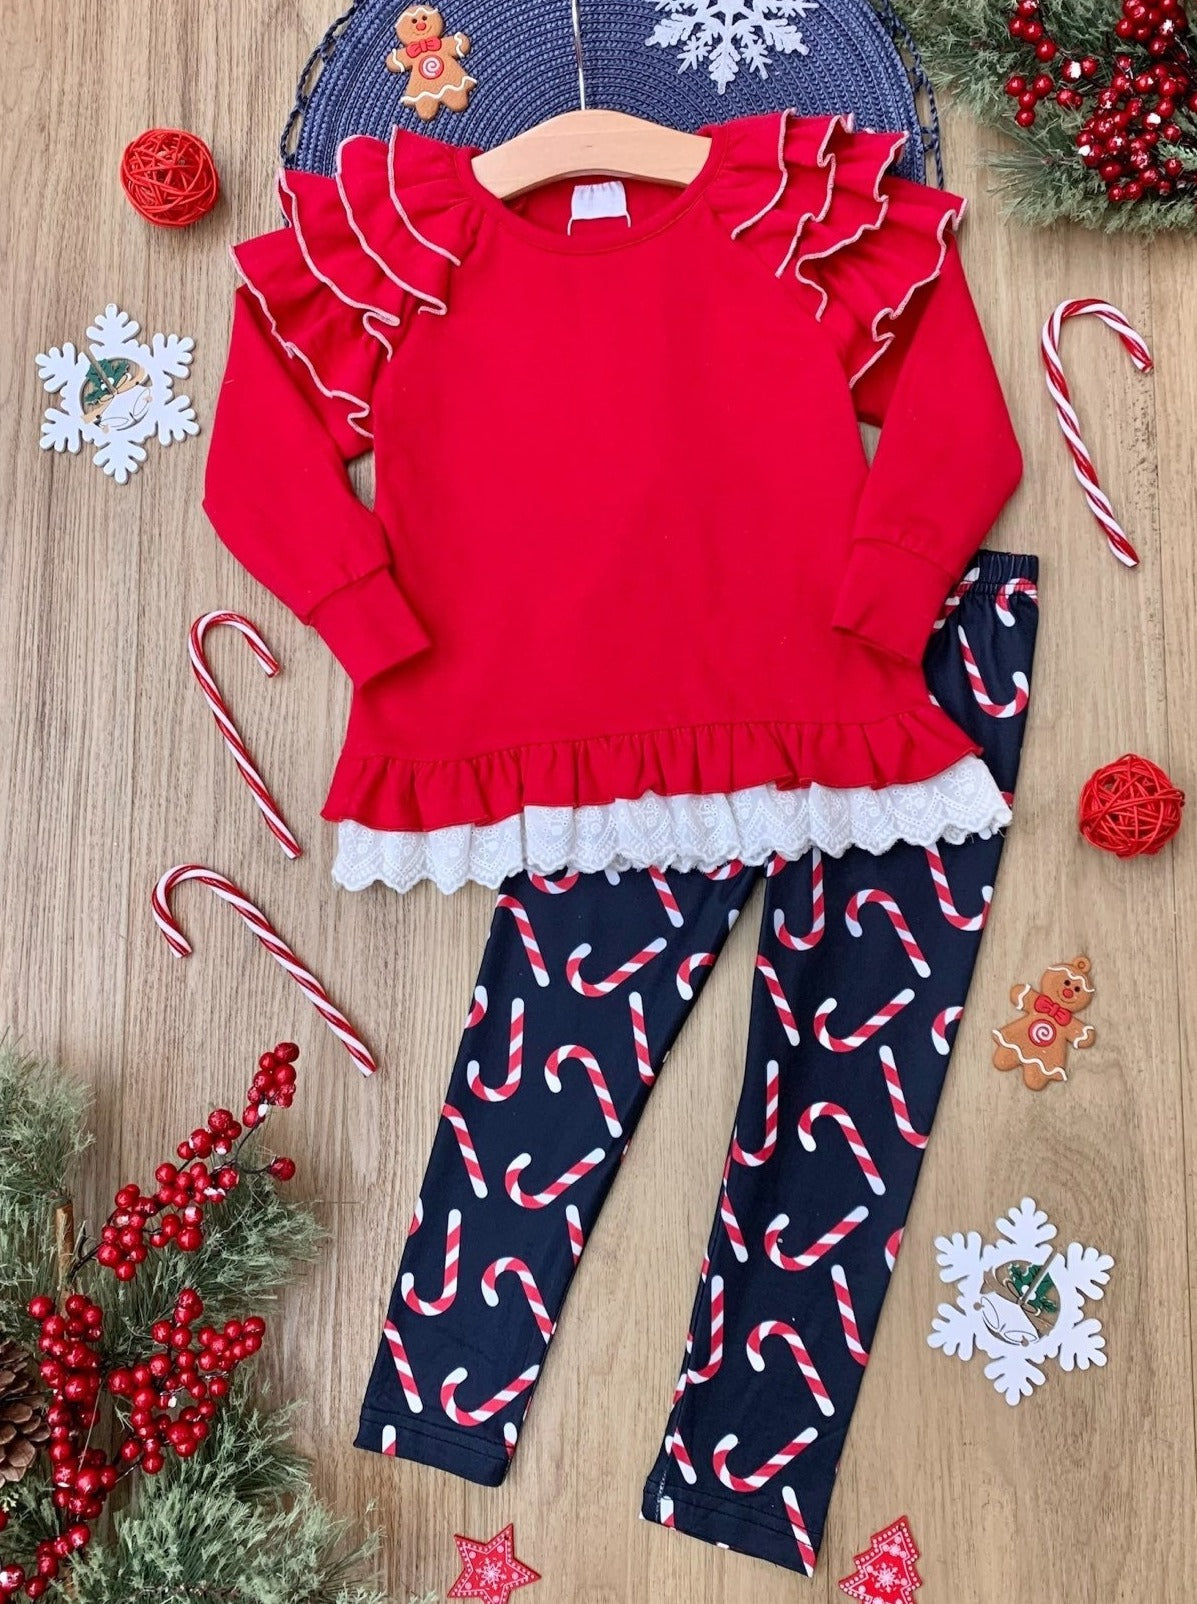 Mia Belle Girls Top & Candy Cane Legging Set | Girls Winter Outfits